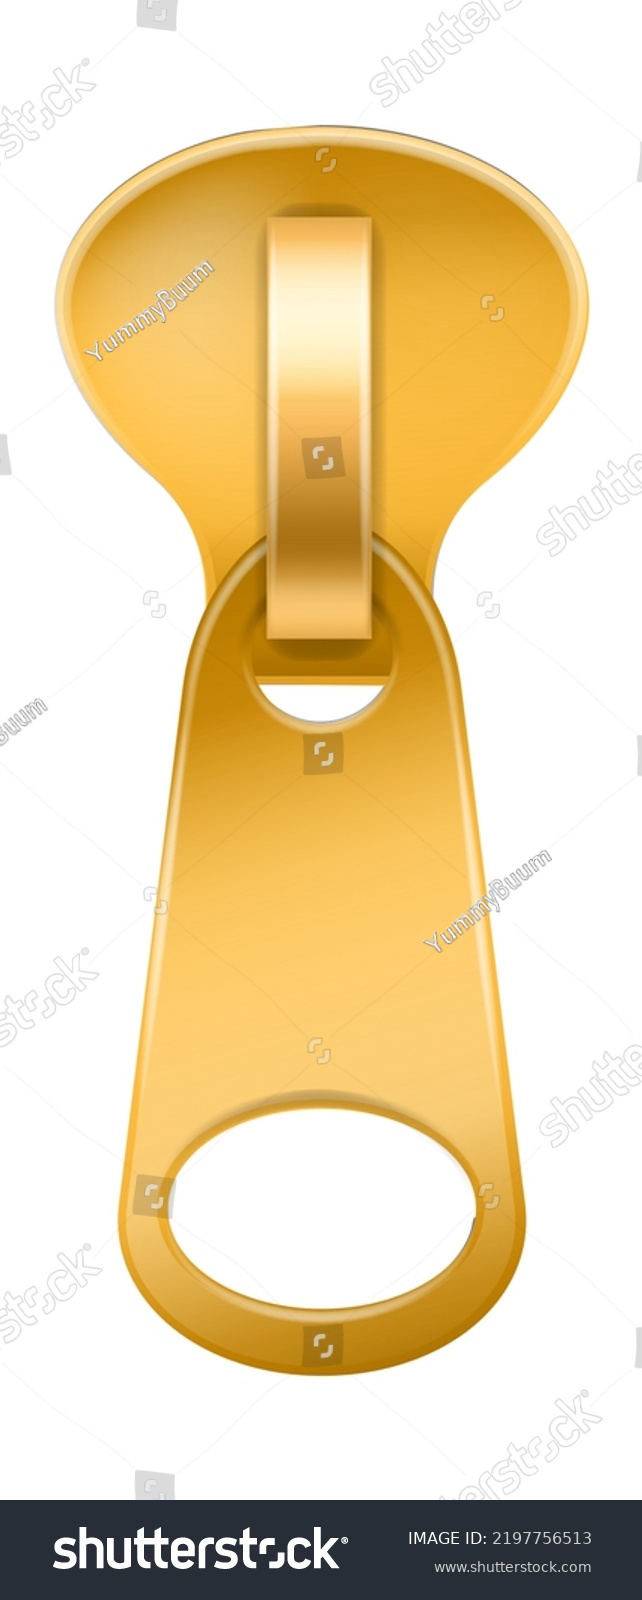 SVG of Zipper puller. Realistic golden closing fabric fastener isolated on white background svg